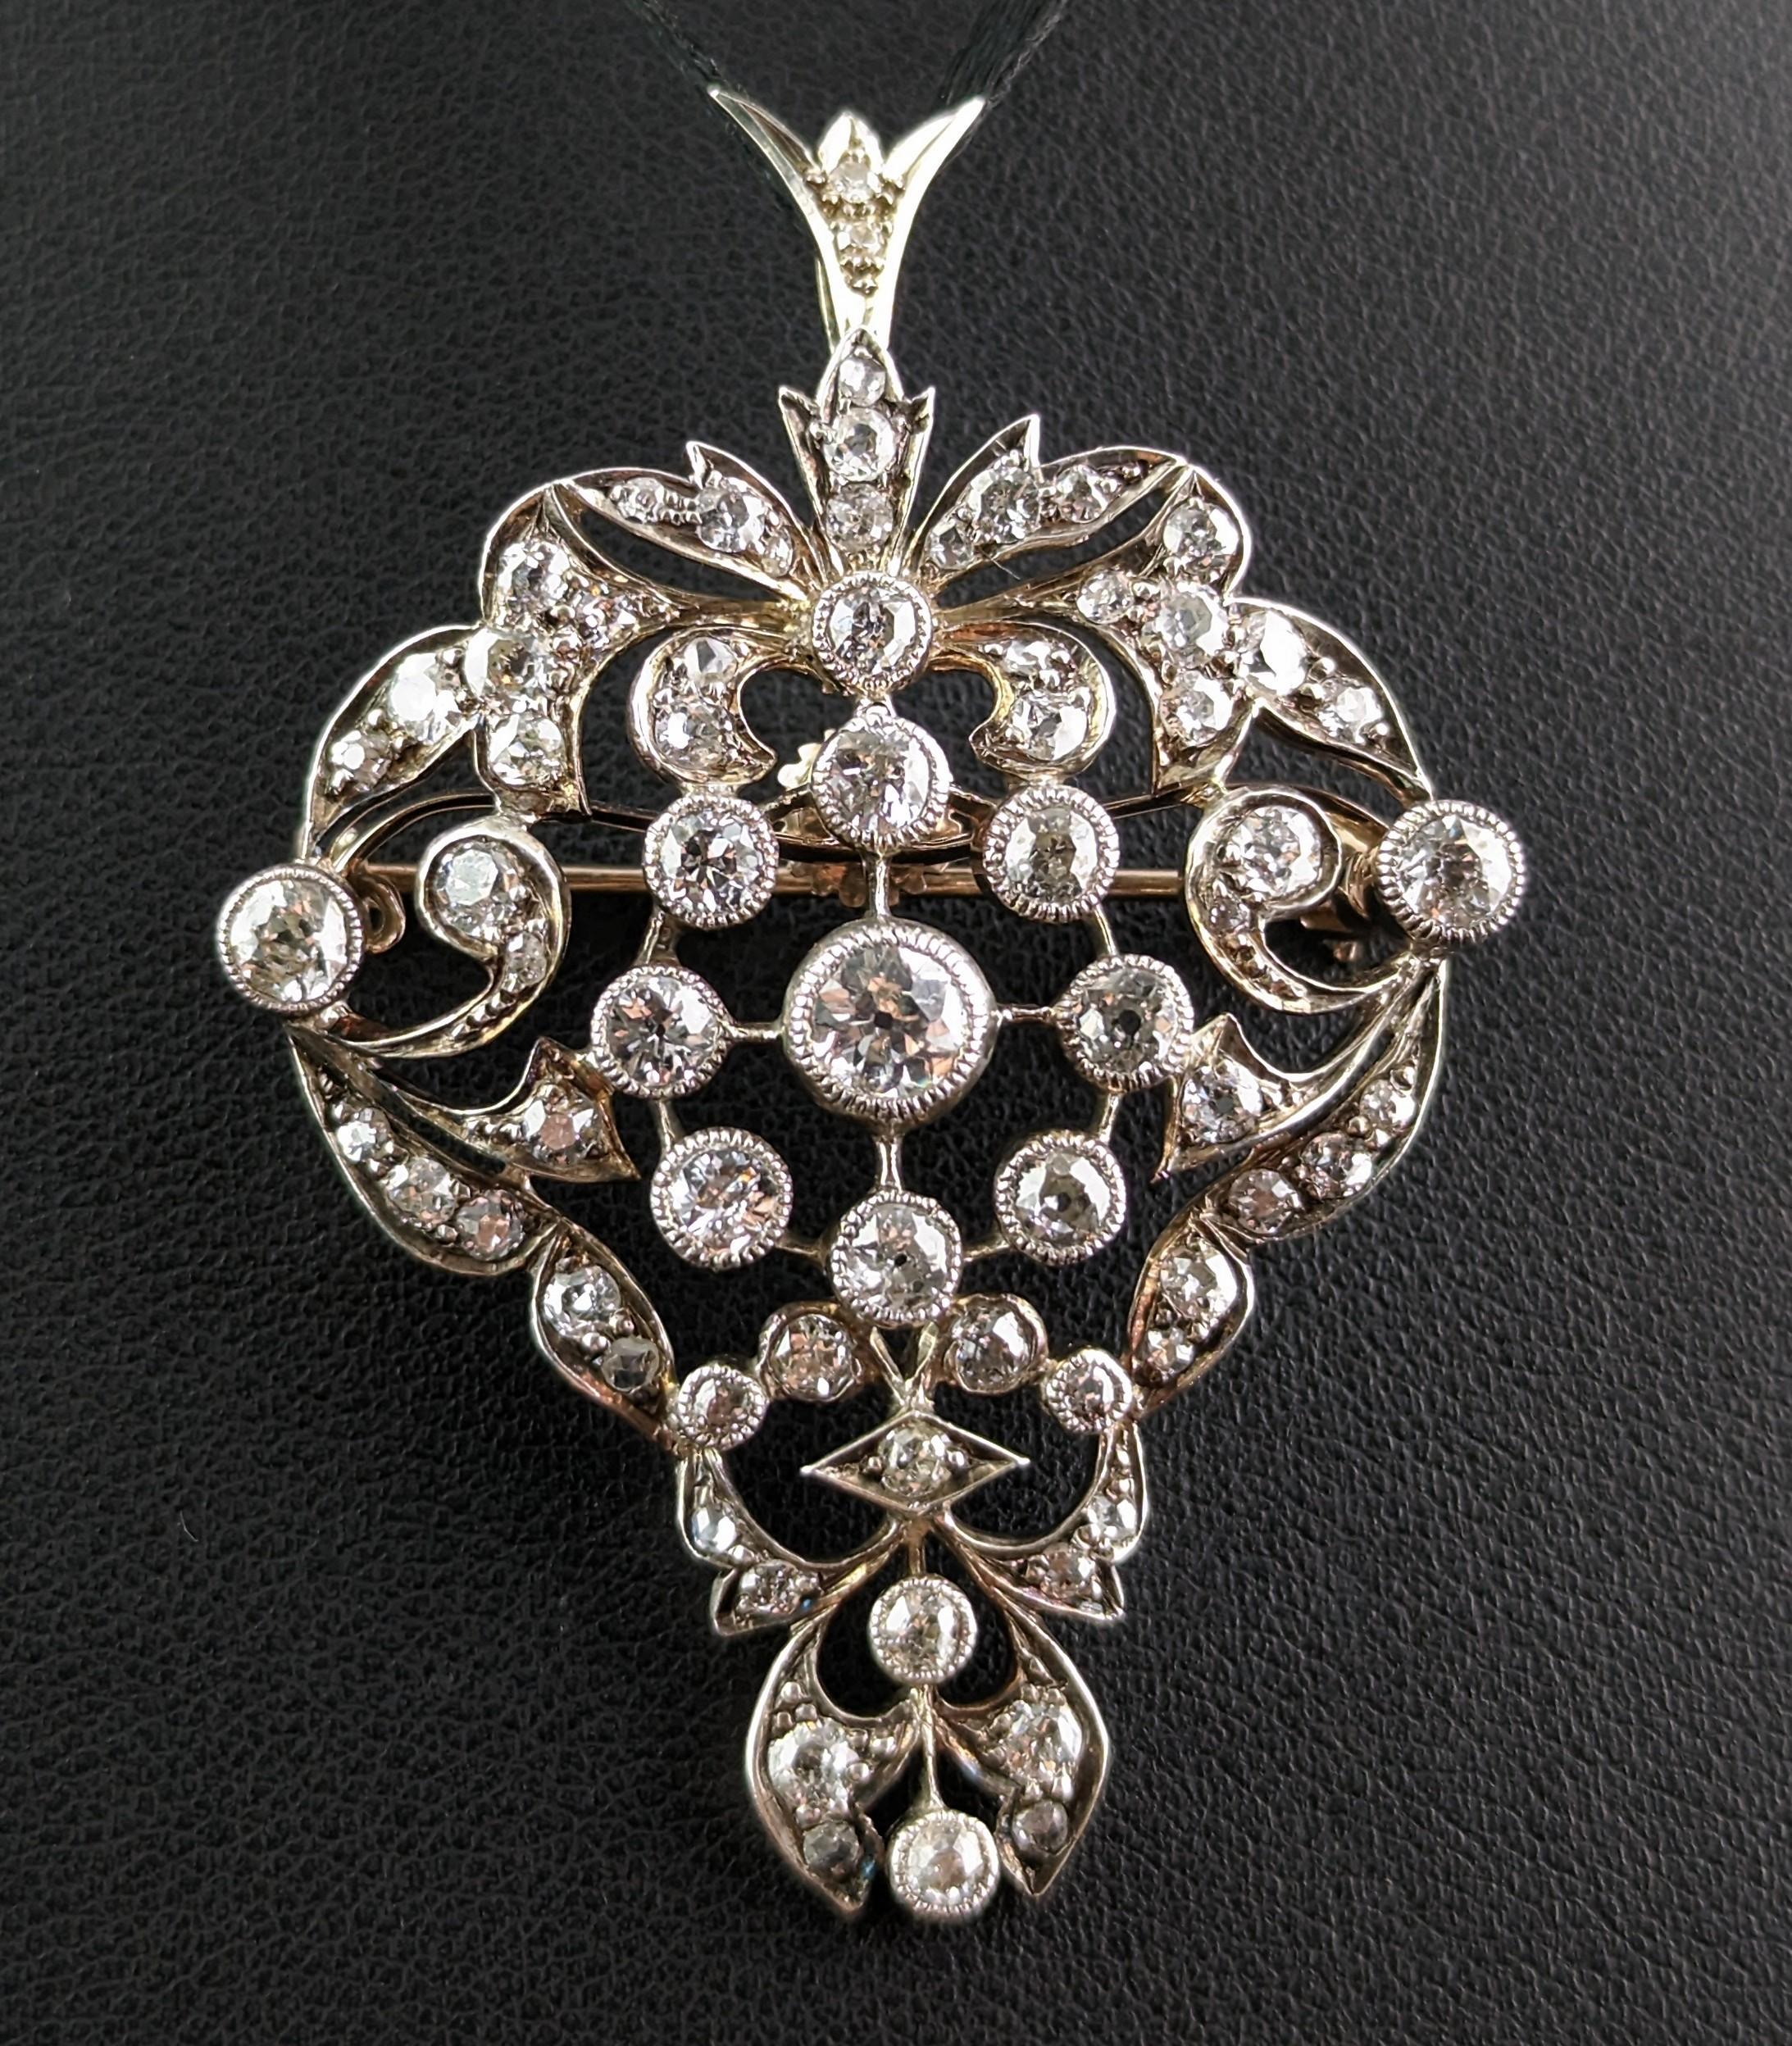 Antique Victorian Diamond Pendant Brooch, Bunch of Grapes, 9k Gold and Silver For Sale 2